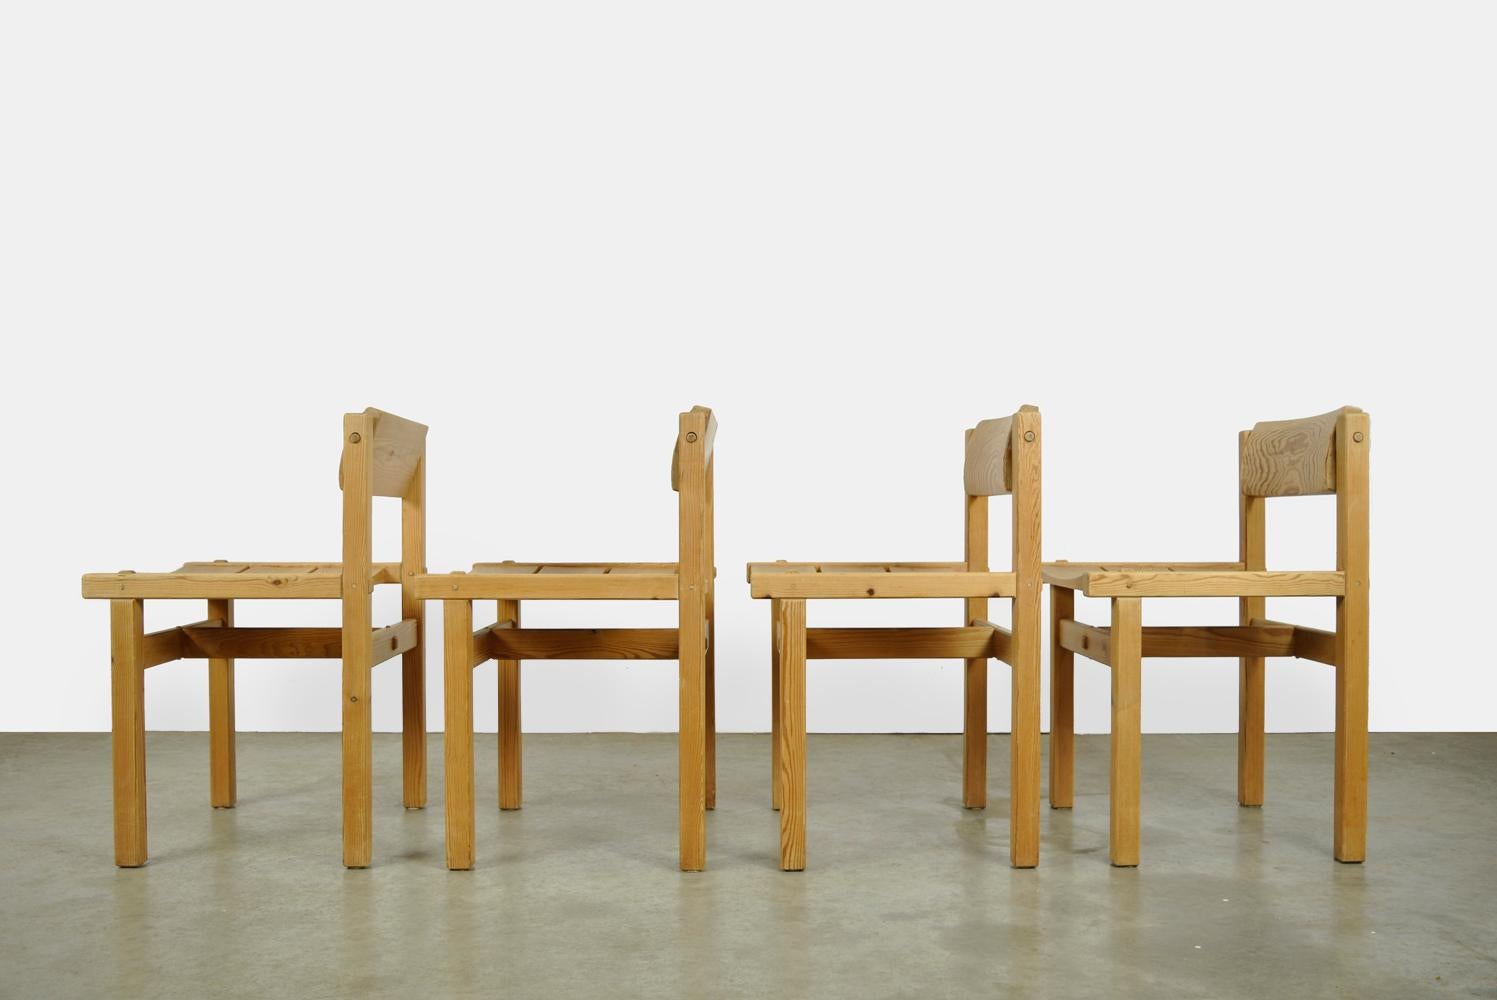 Mid-20th Century Trybo pine dining chairs (4) by Edvin Helseth for Stange Bruk, Norway 1960s For Sale